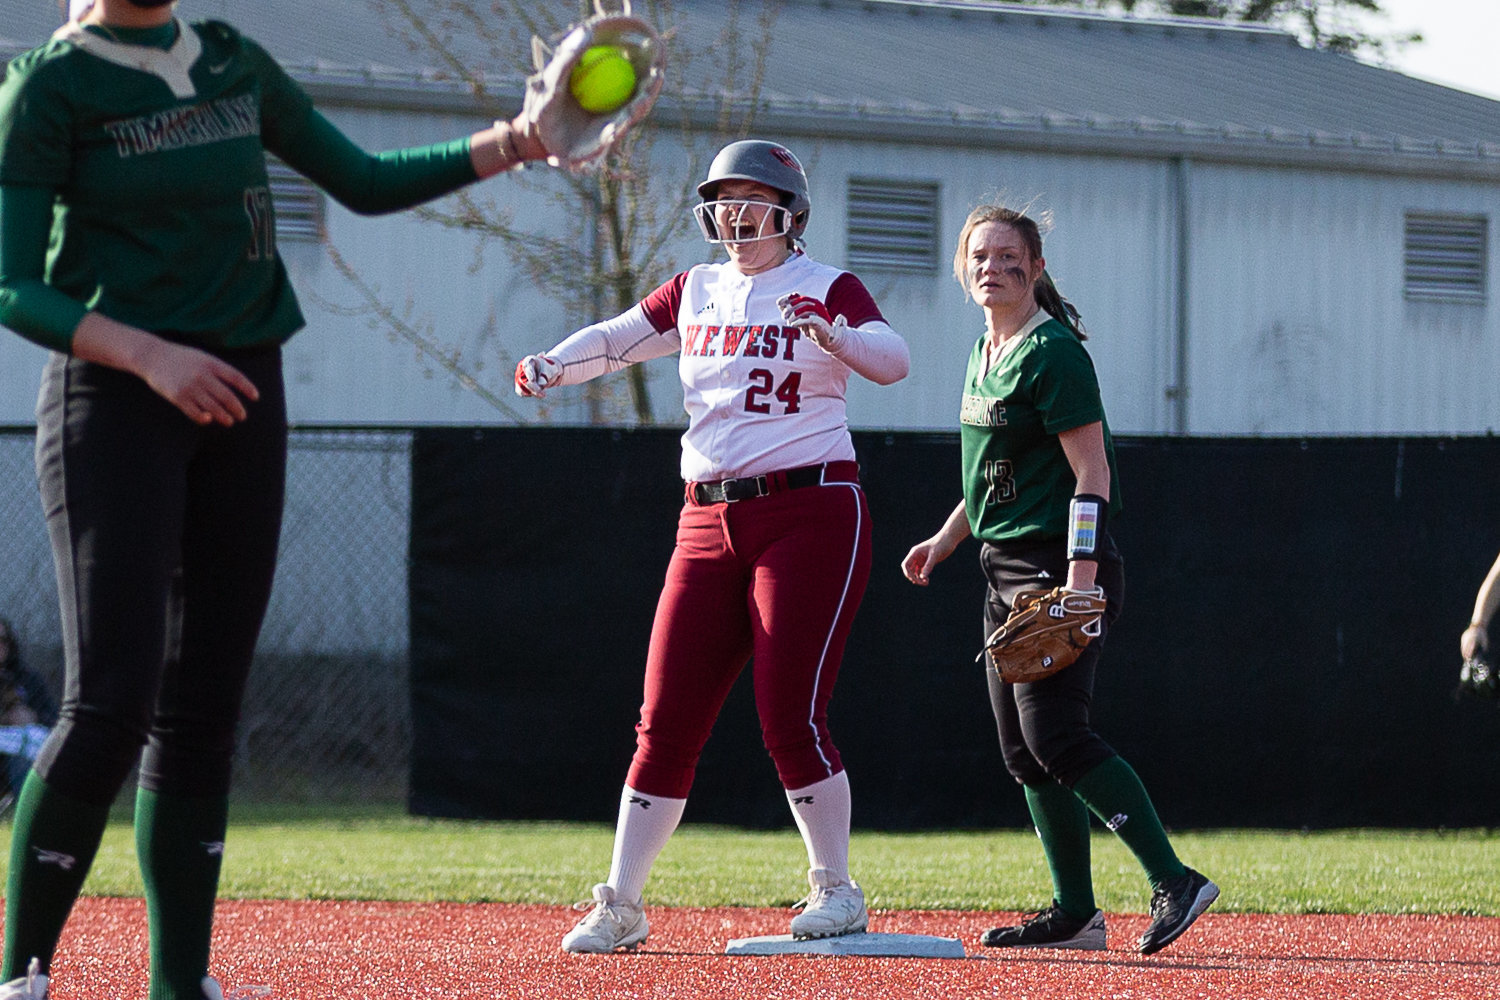 W.F. West first baseman Savannah Hawkins celebrates after a double against Timberline March 16 at Rec Park.